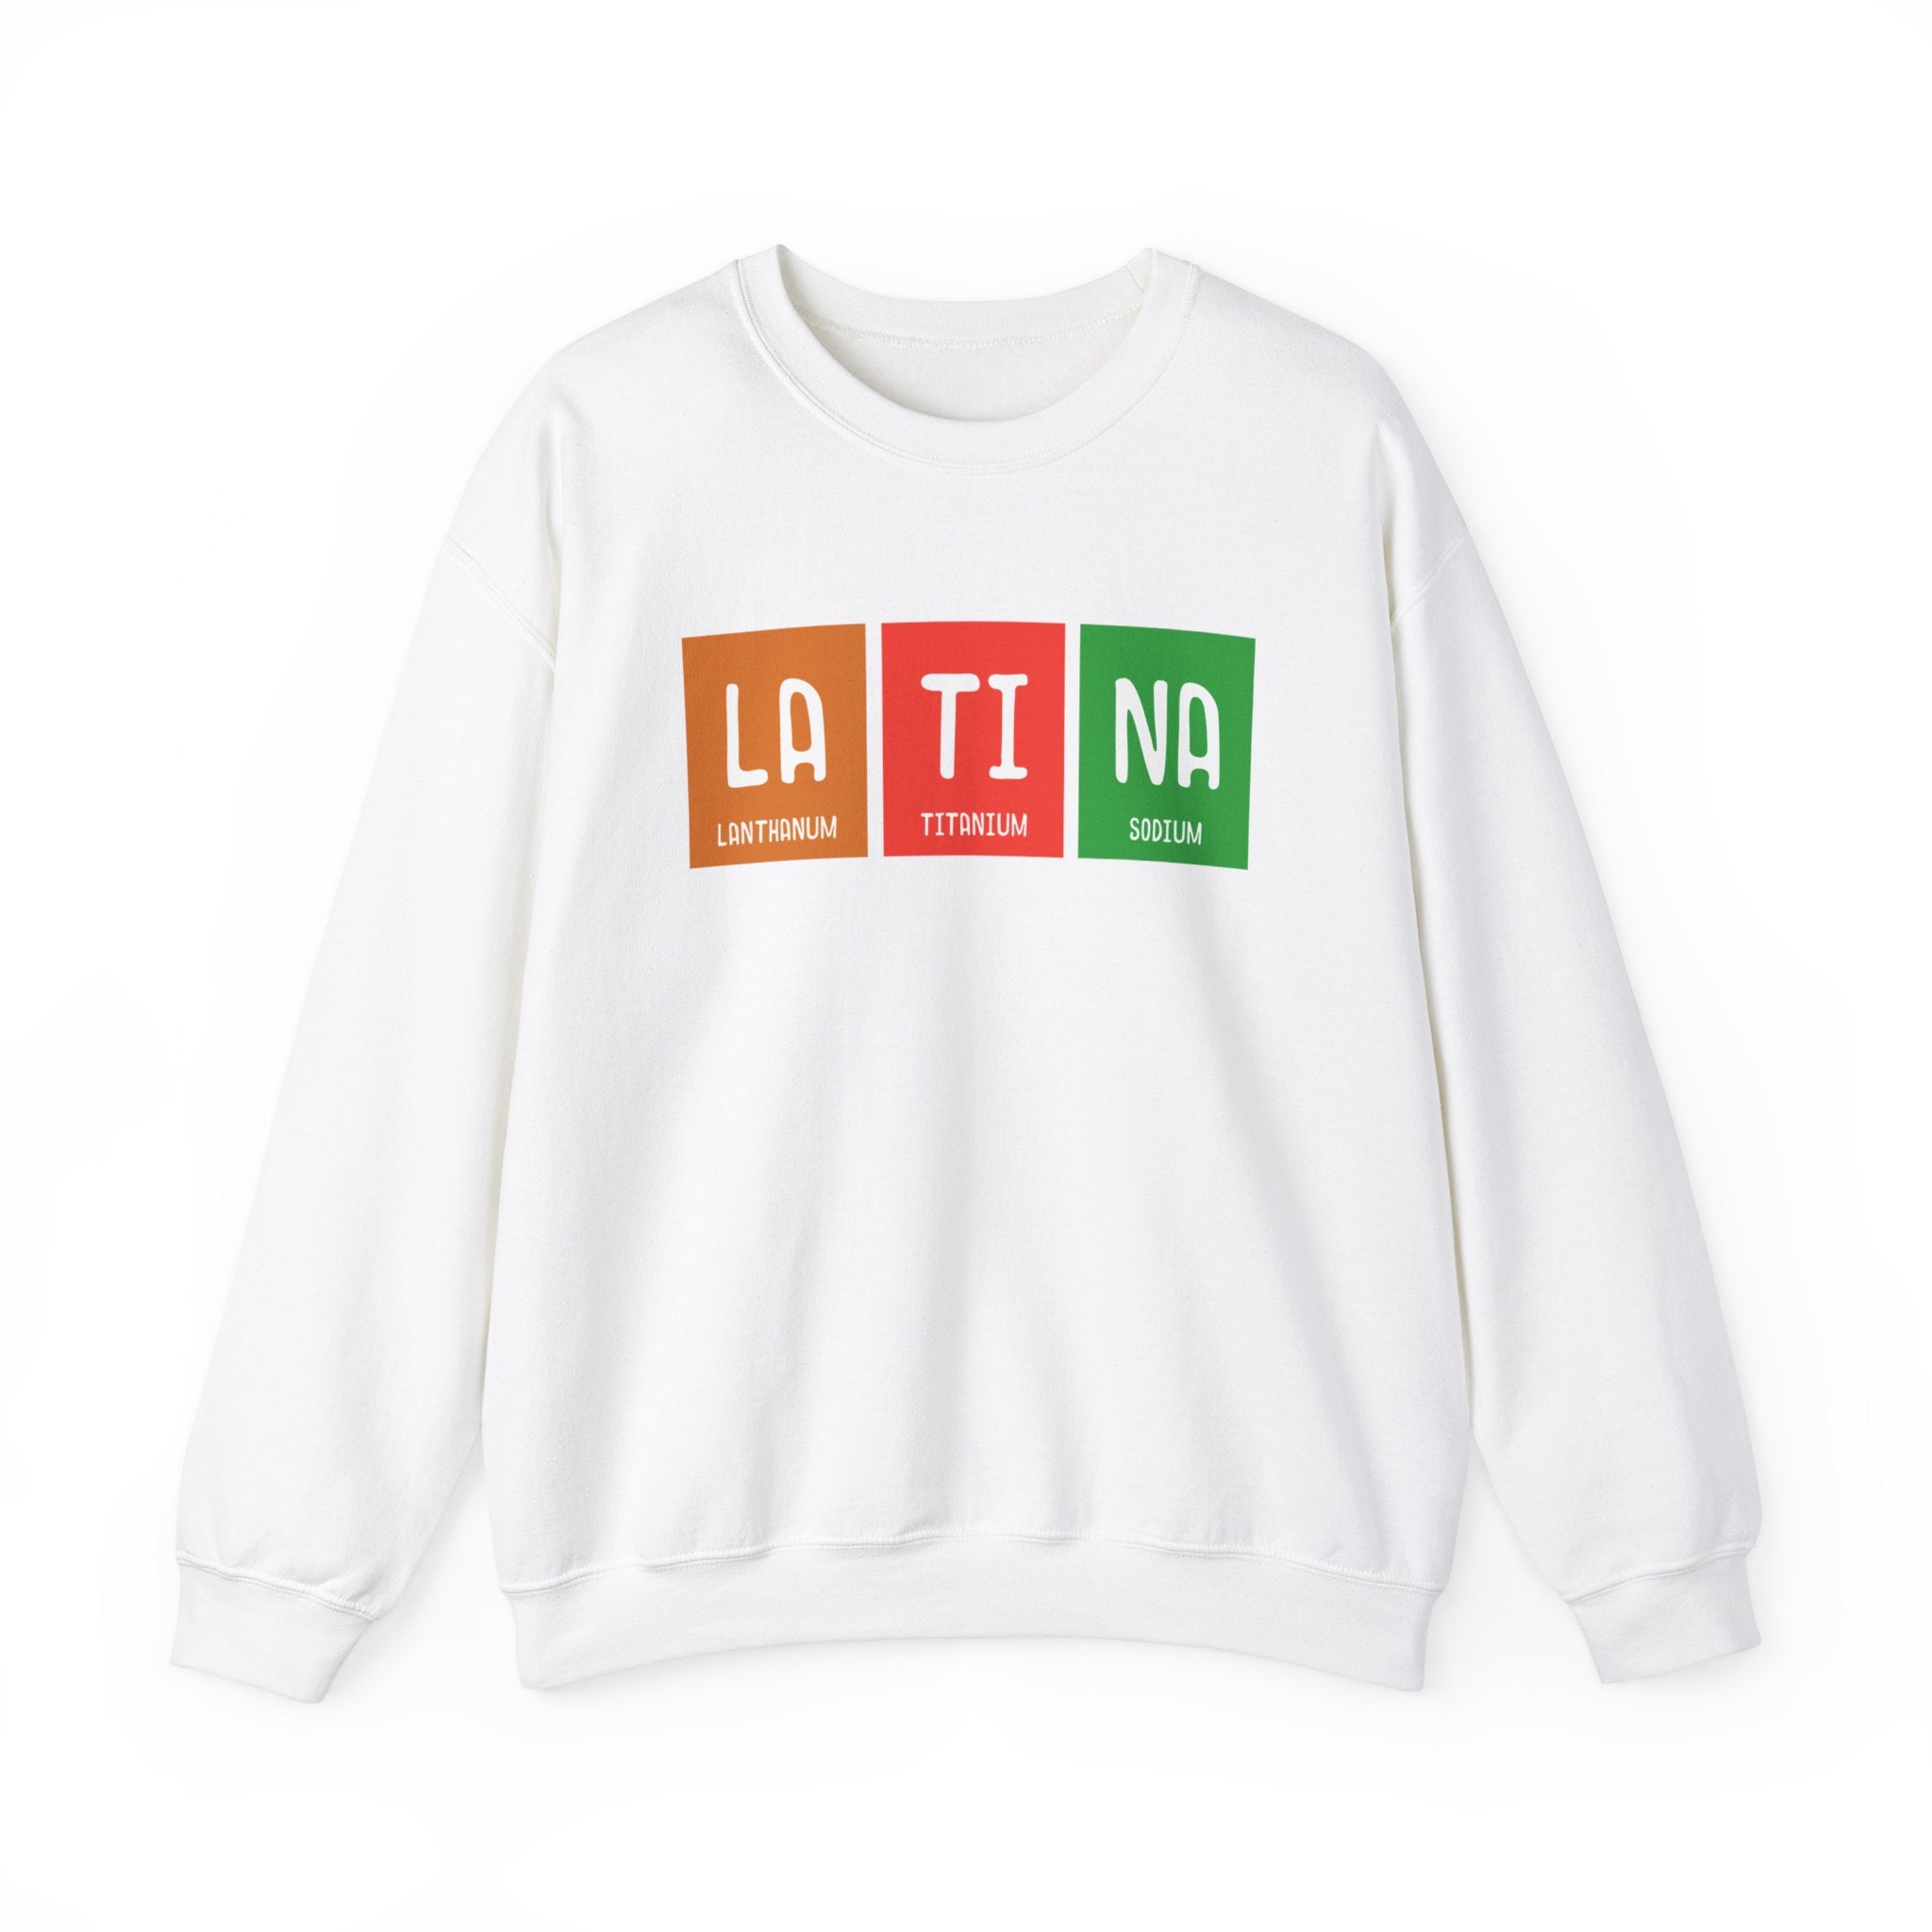 LA-TI-NA - Sweatshirt: Cozy white sweatshirt featuring periodic table elements La, Ti, and Na, representing lanthanum, titanium, and sodium respectively. A perfect winter essential to keep you warm and stylish.